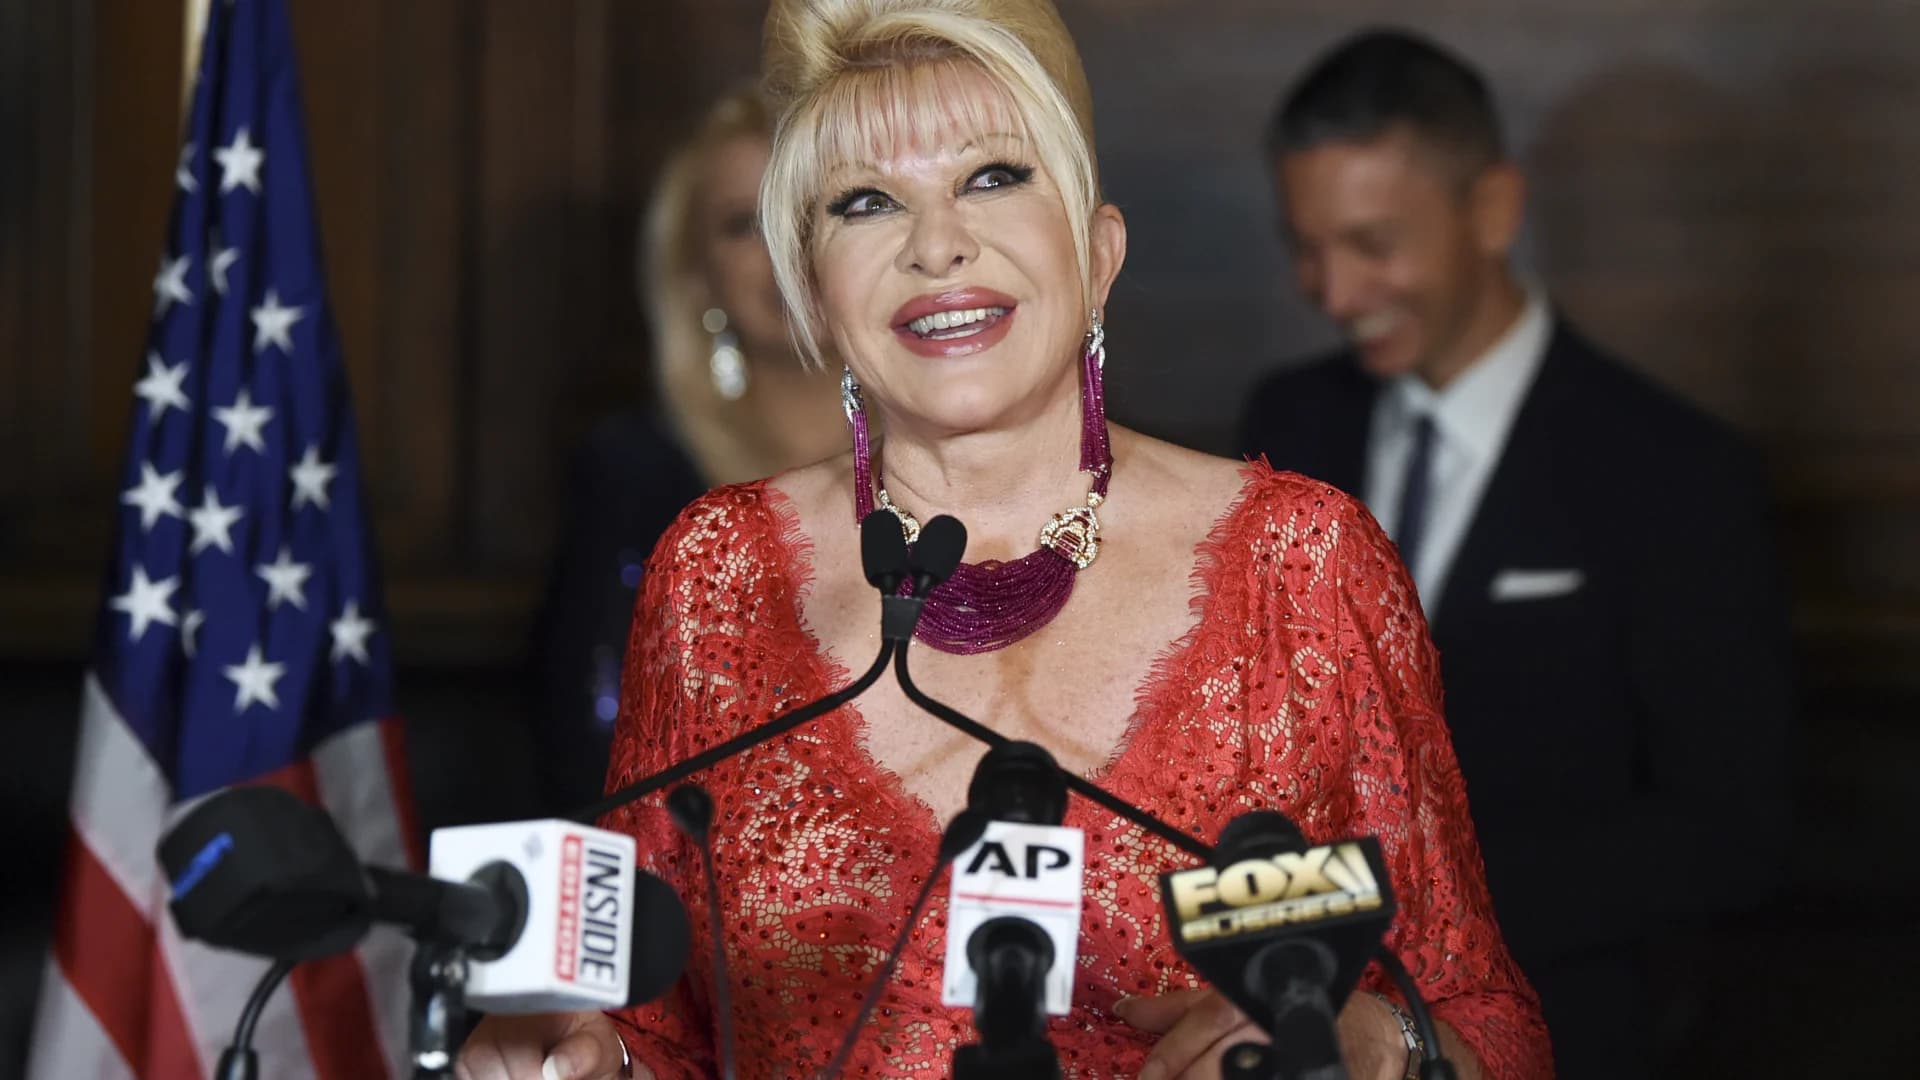 Ivana Trump, first wife of former President Donald Trump, has died